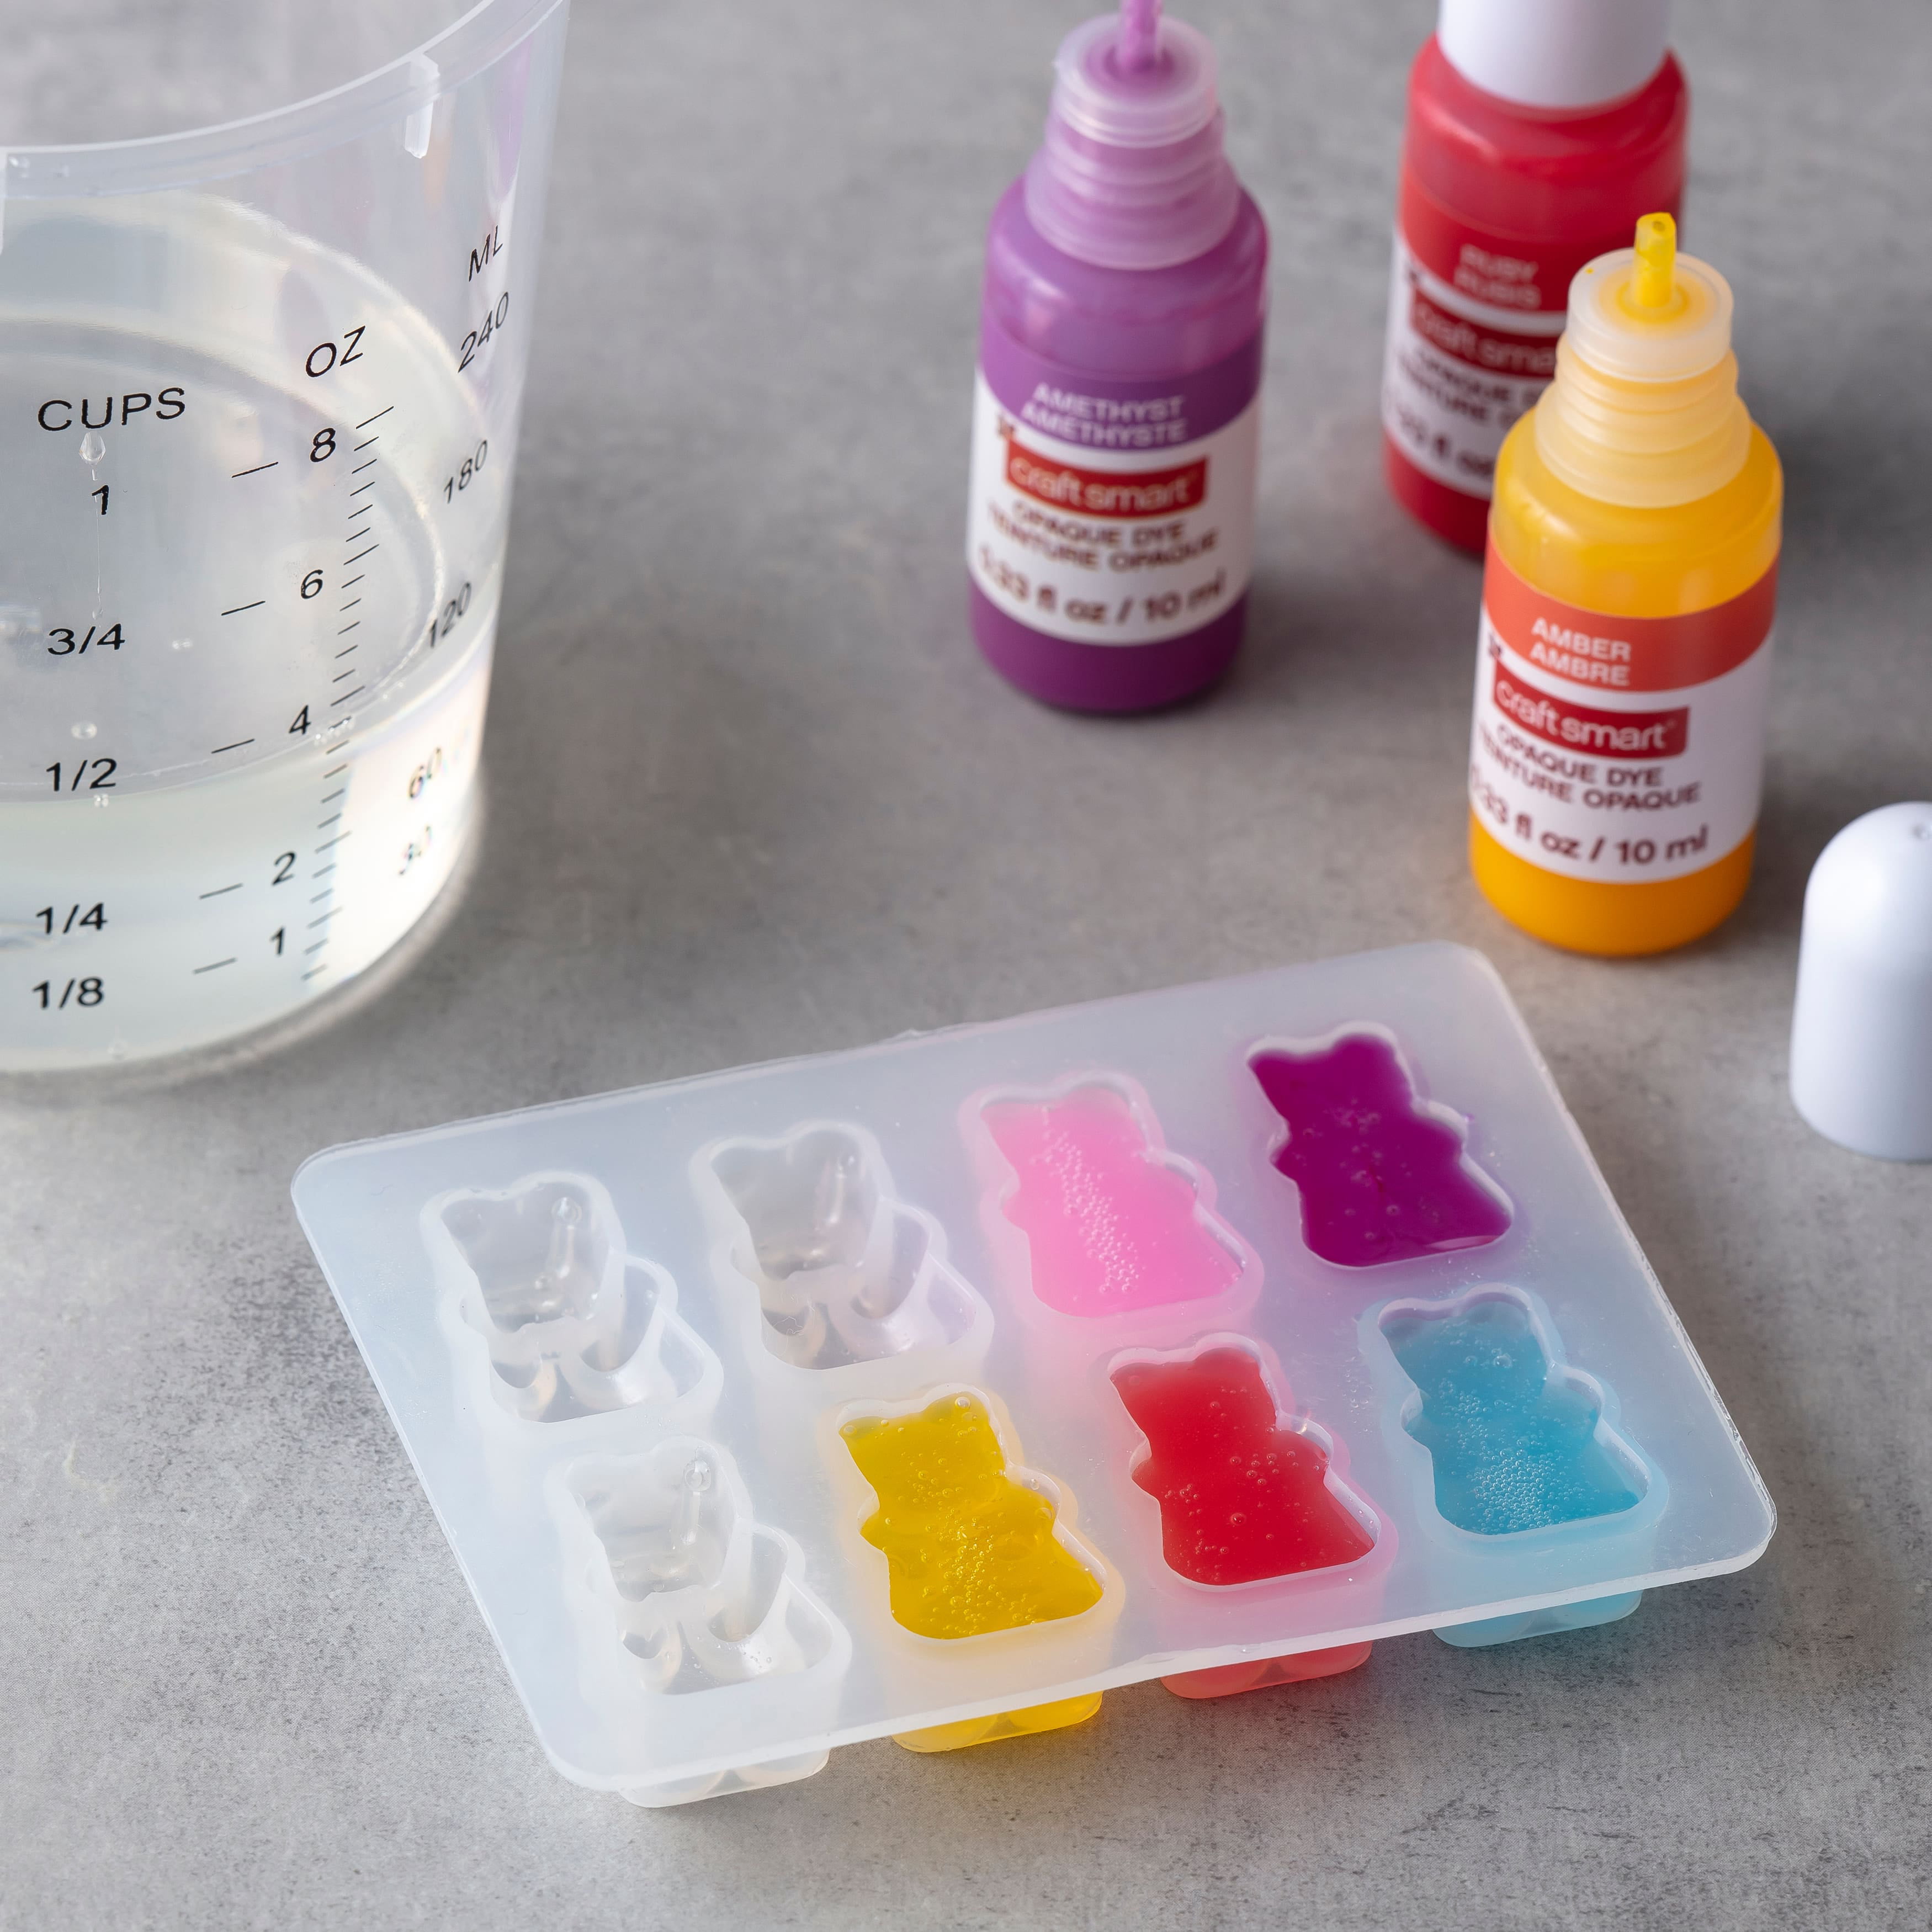 6 Pack: Gummy Bears Silicone Mold by Craft Smart®